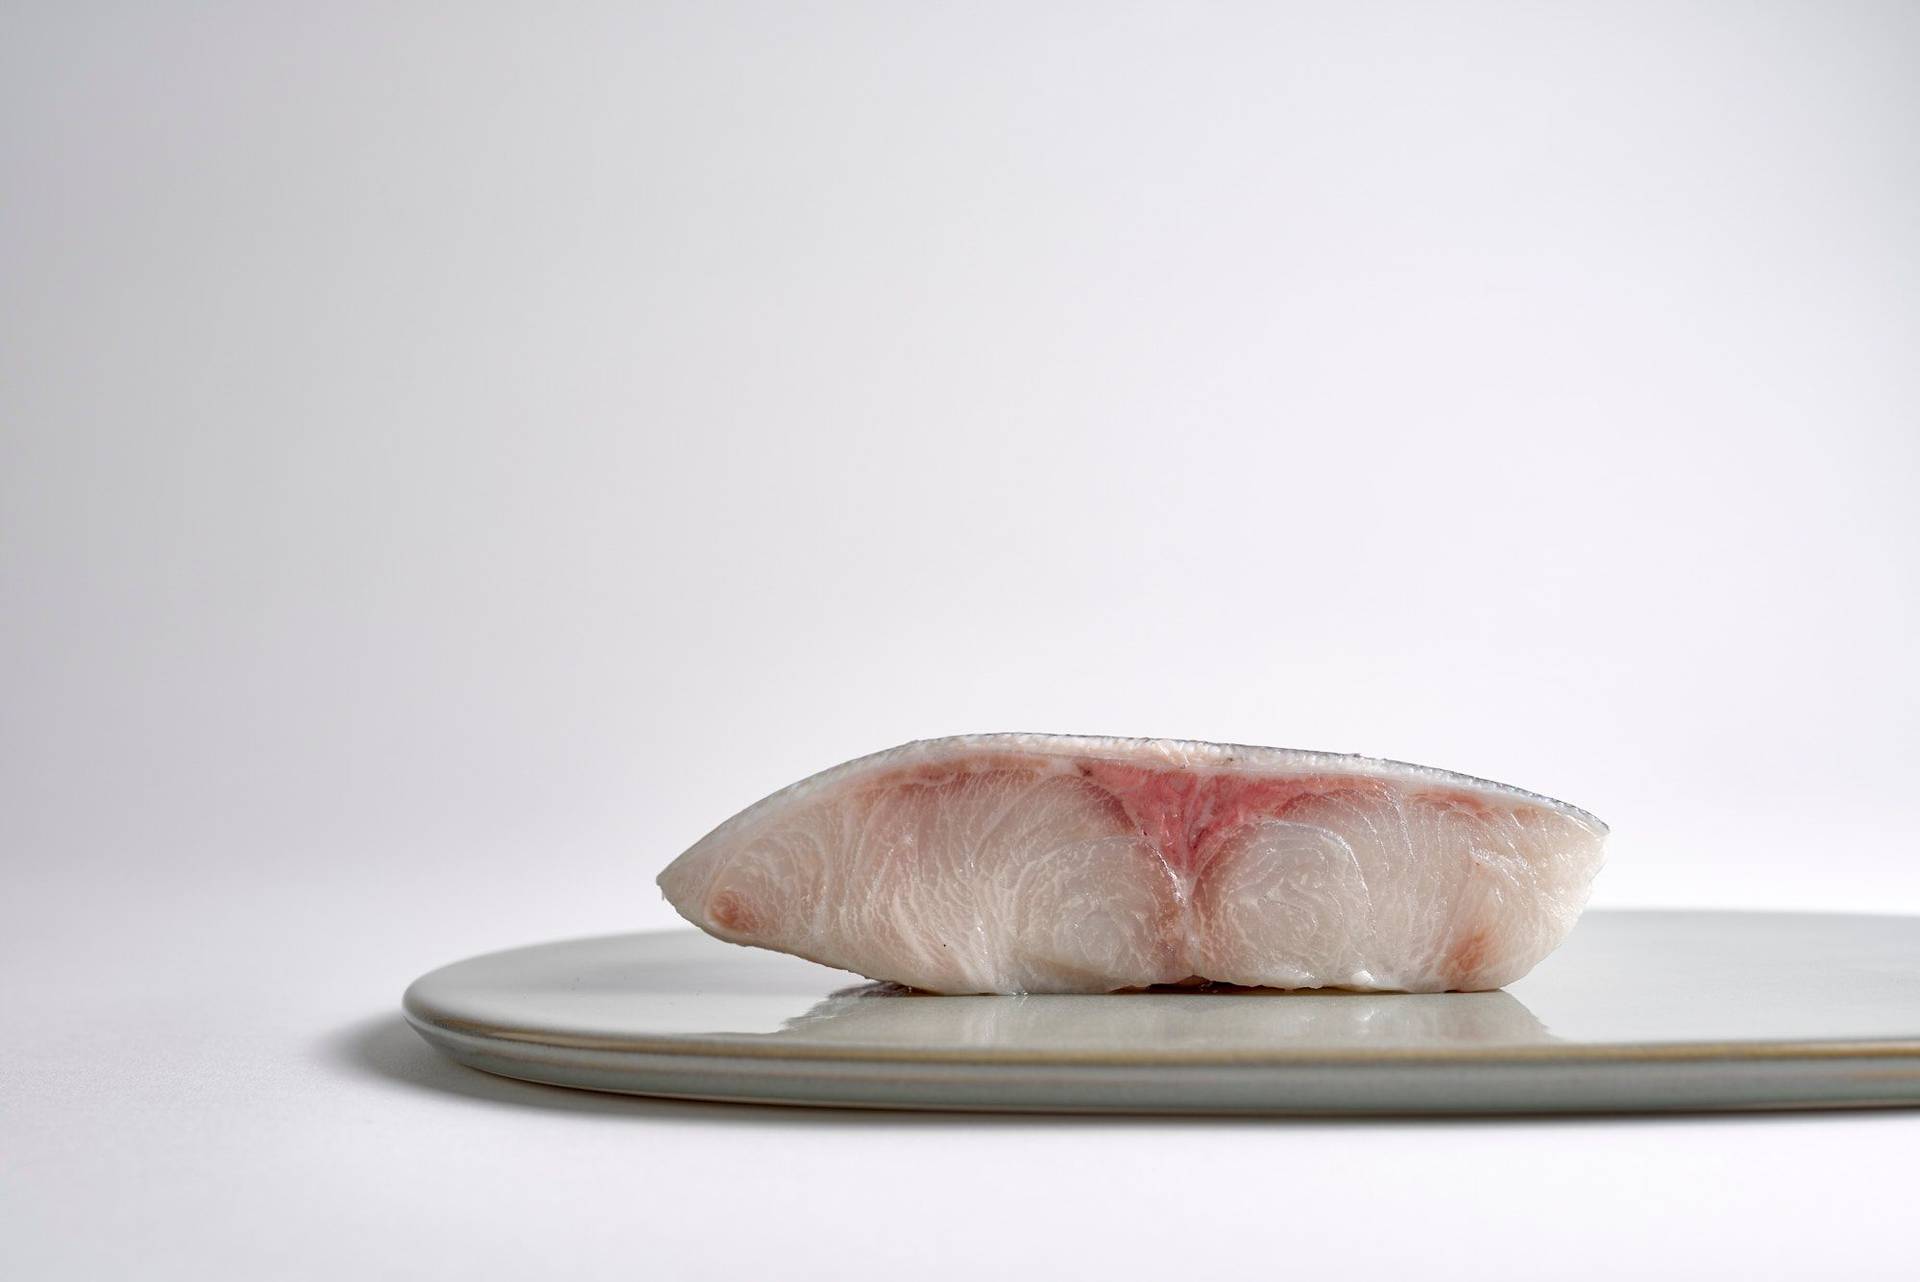 kingfish on a gray plate with white background